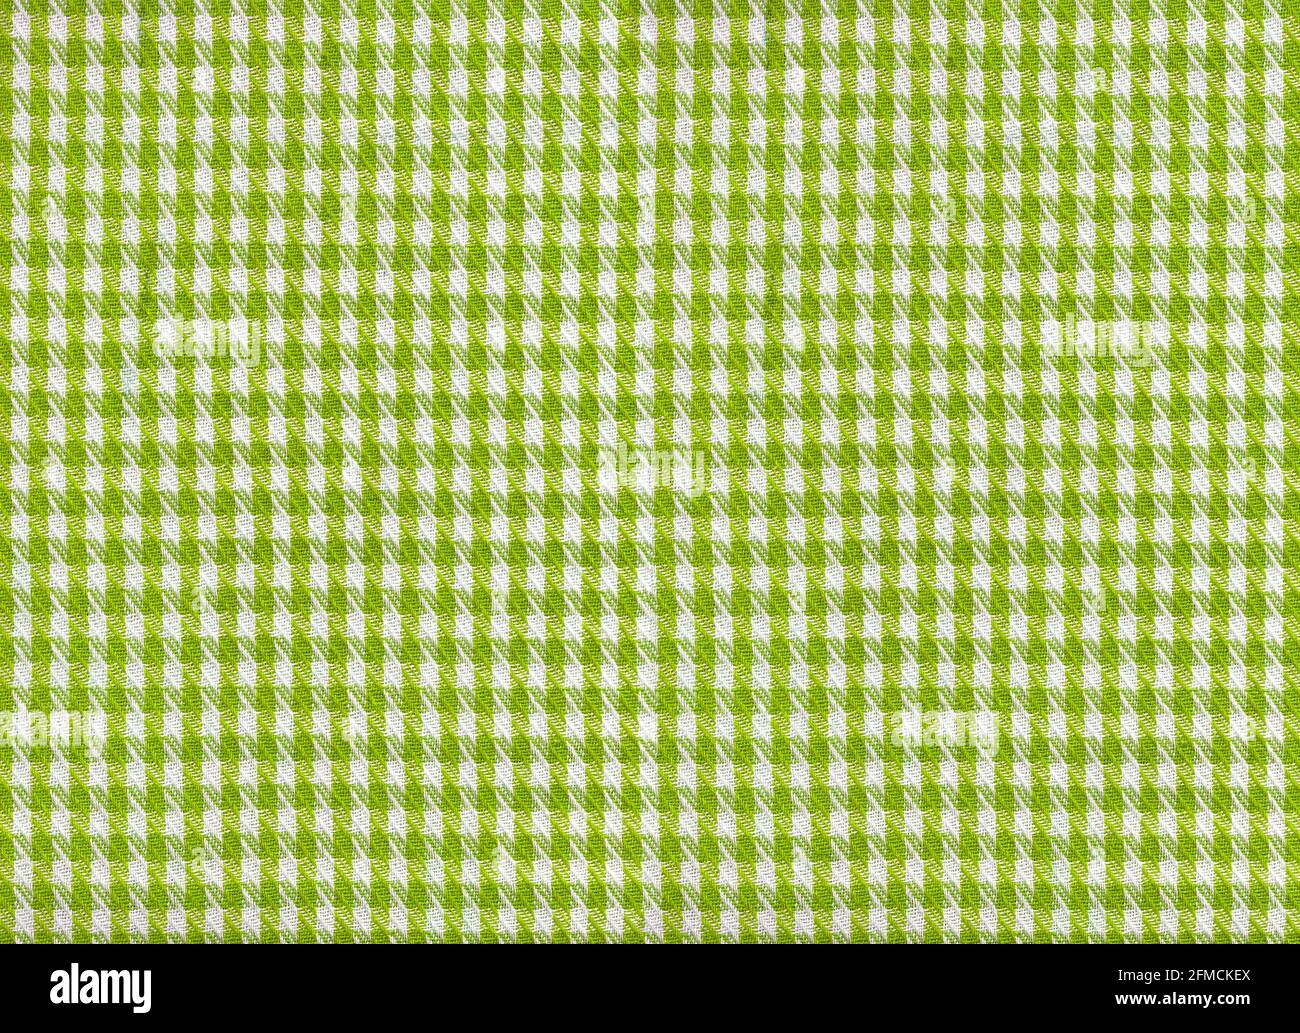 A flat area of woven fabric as a background texture and pattern green and white gingham Stock Photo